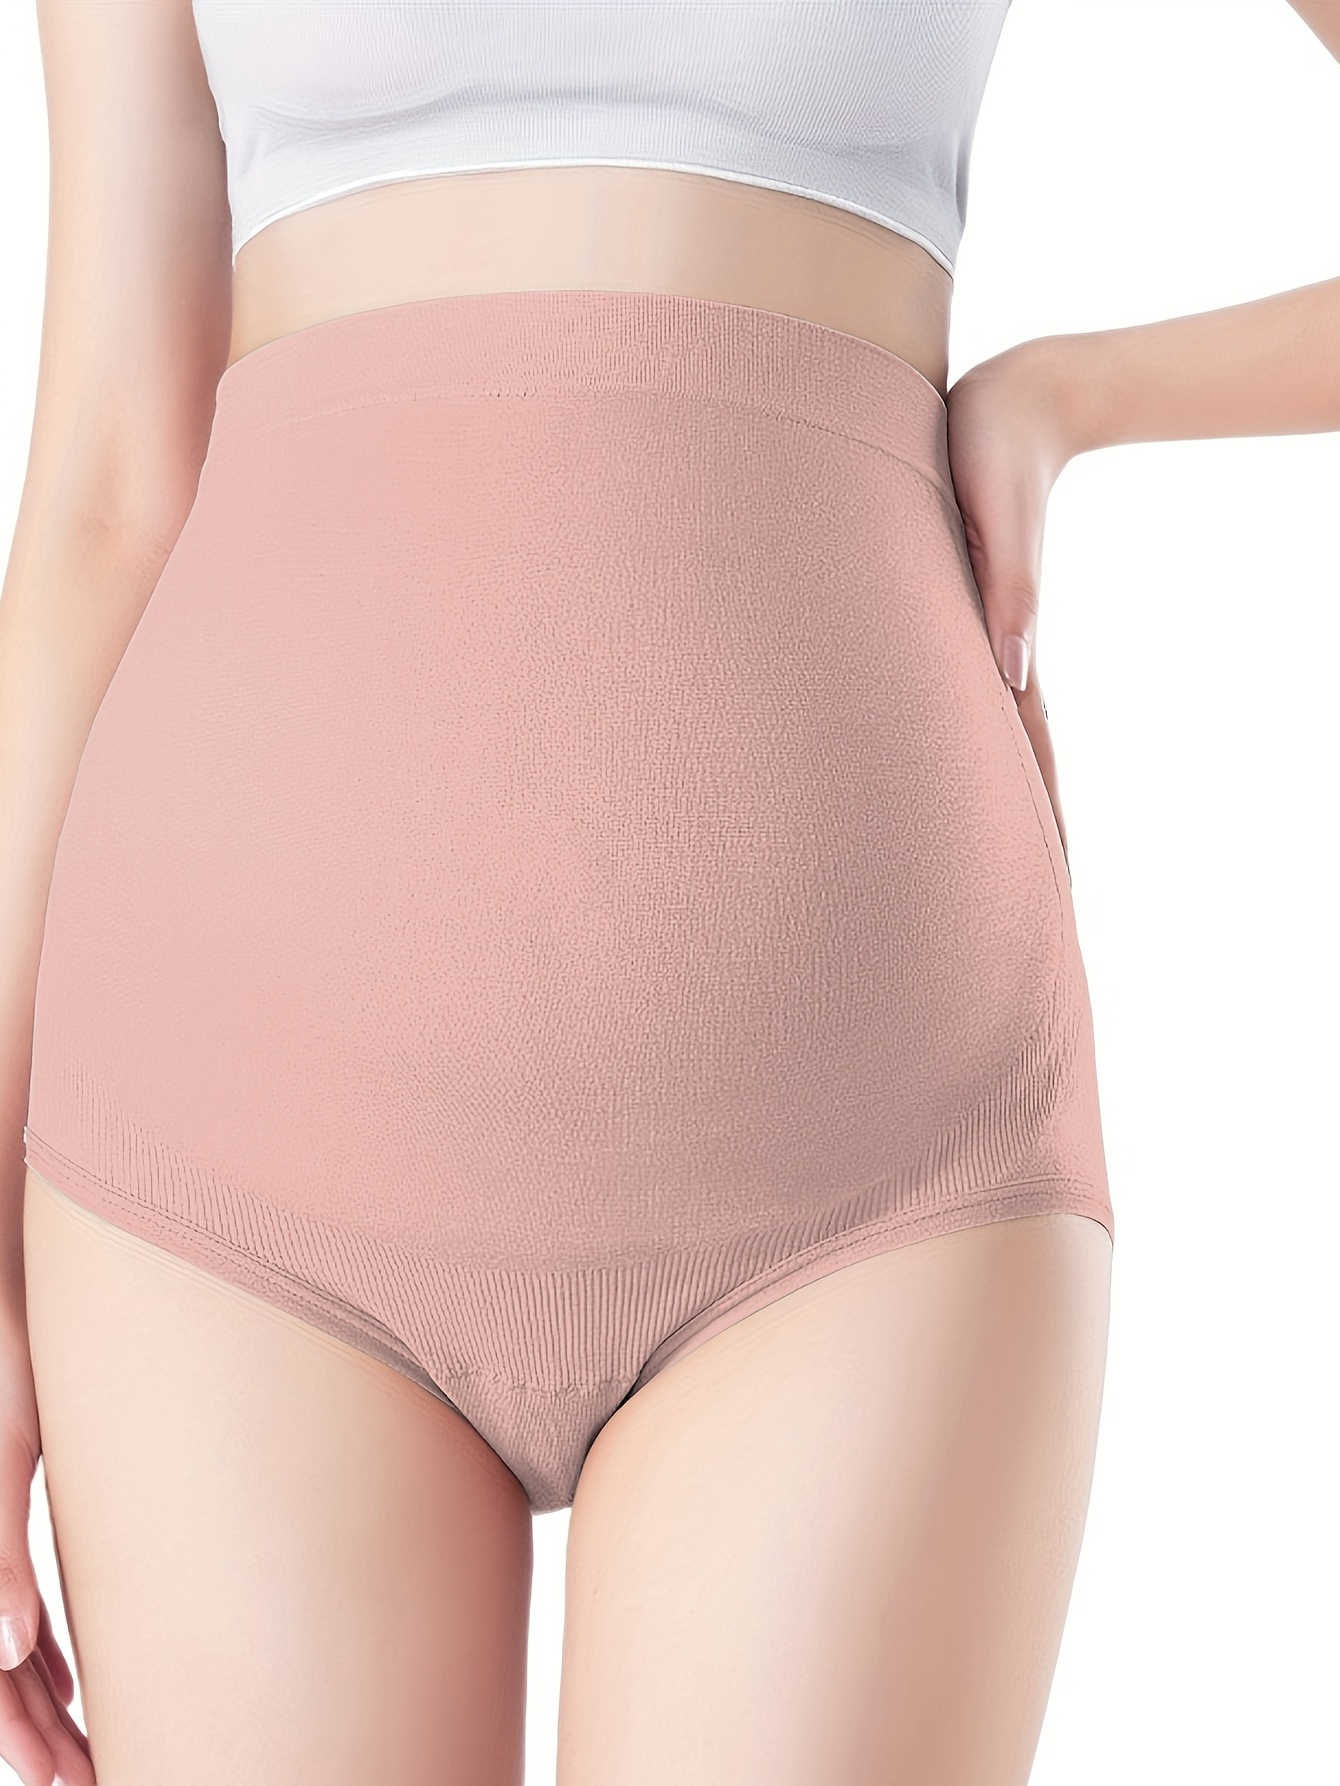 JDEFEG Maternity Panties for Pregnancy Thongs for Women Underwear Lady Low  Waist Thong Tangas Solid Color Women Panties Pack Variety Nylon,Spandex  Pink M 